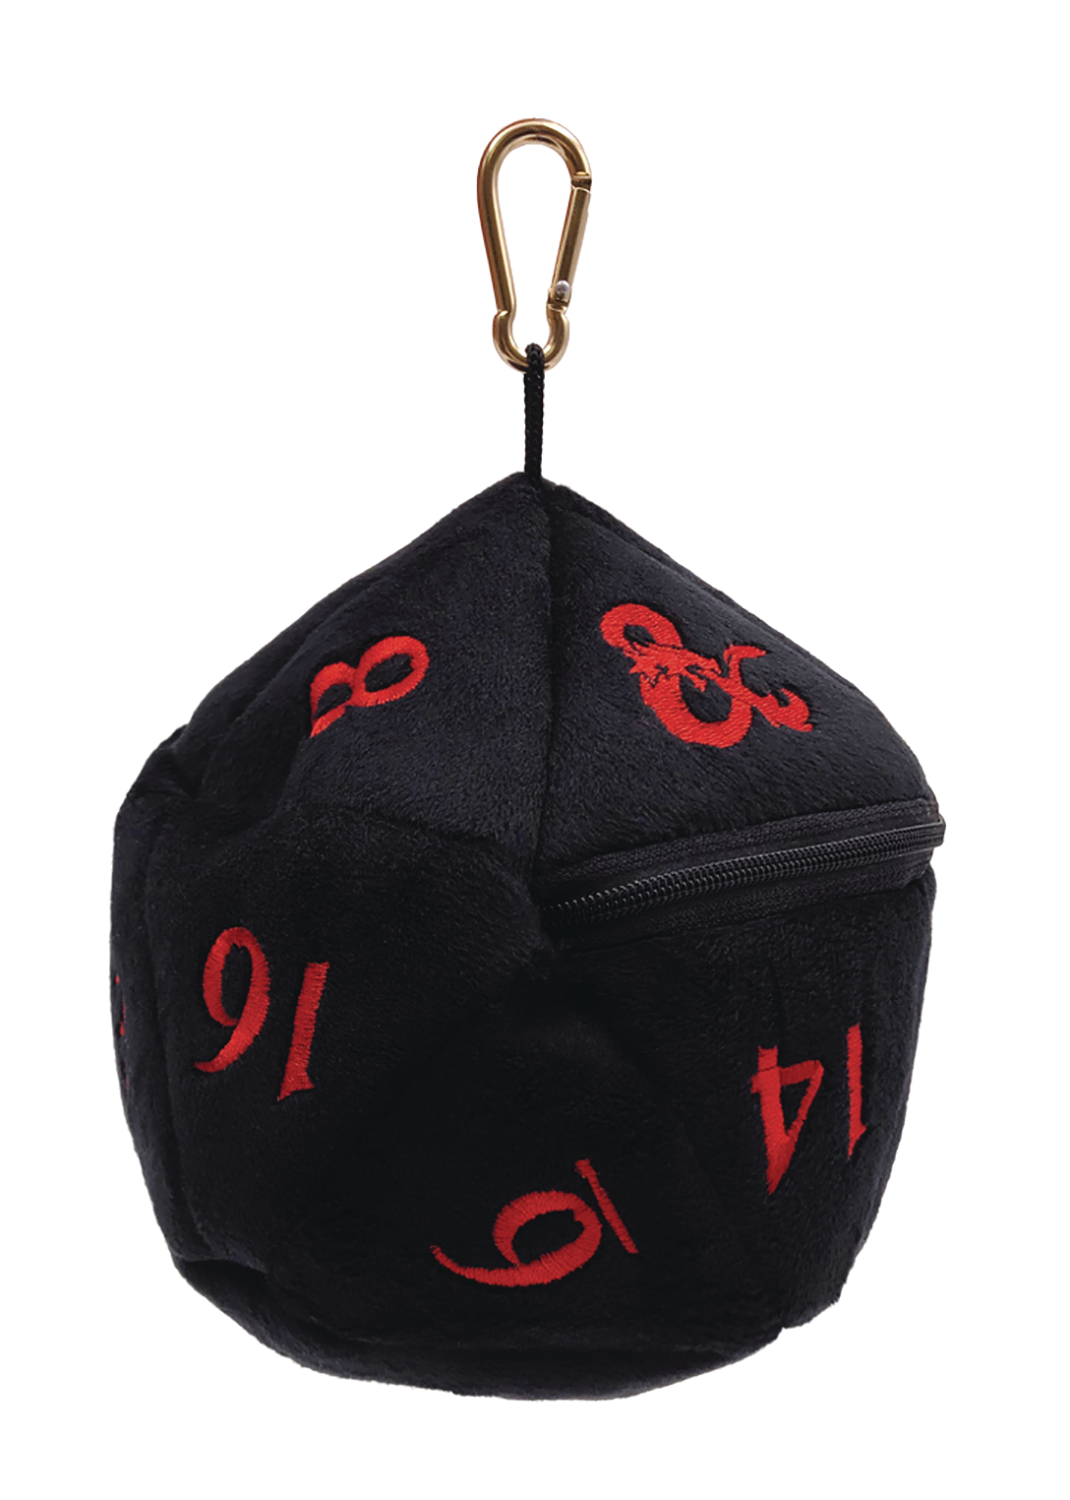 D20 Plush Dice Bag For Dungeons & Dragons Black & Red